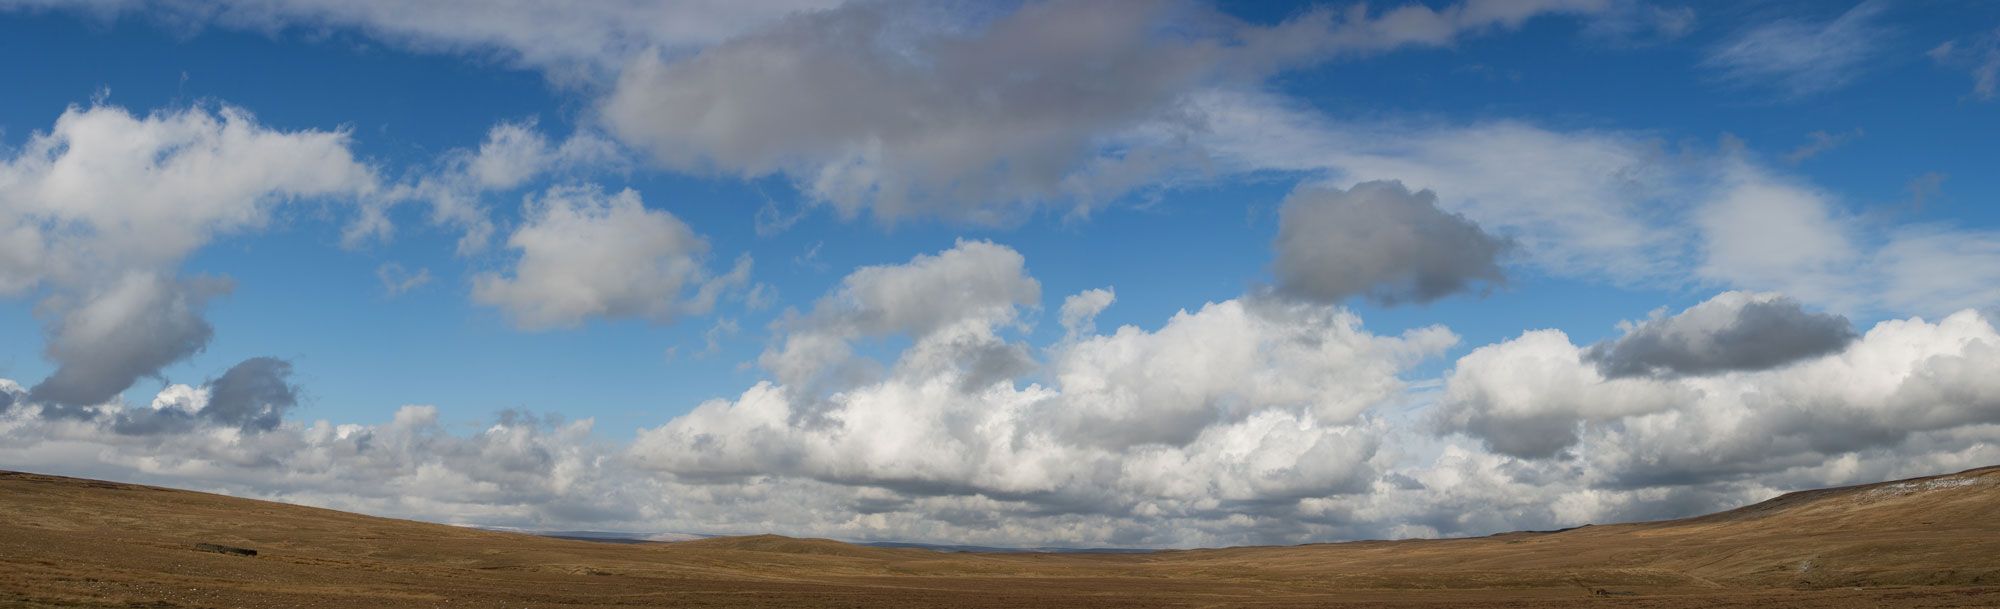 Skyscape of the Yorkshire Dales